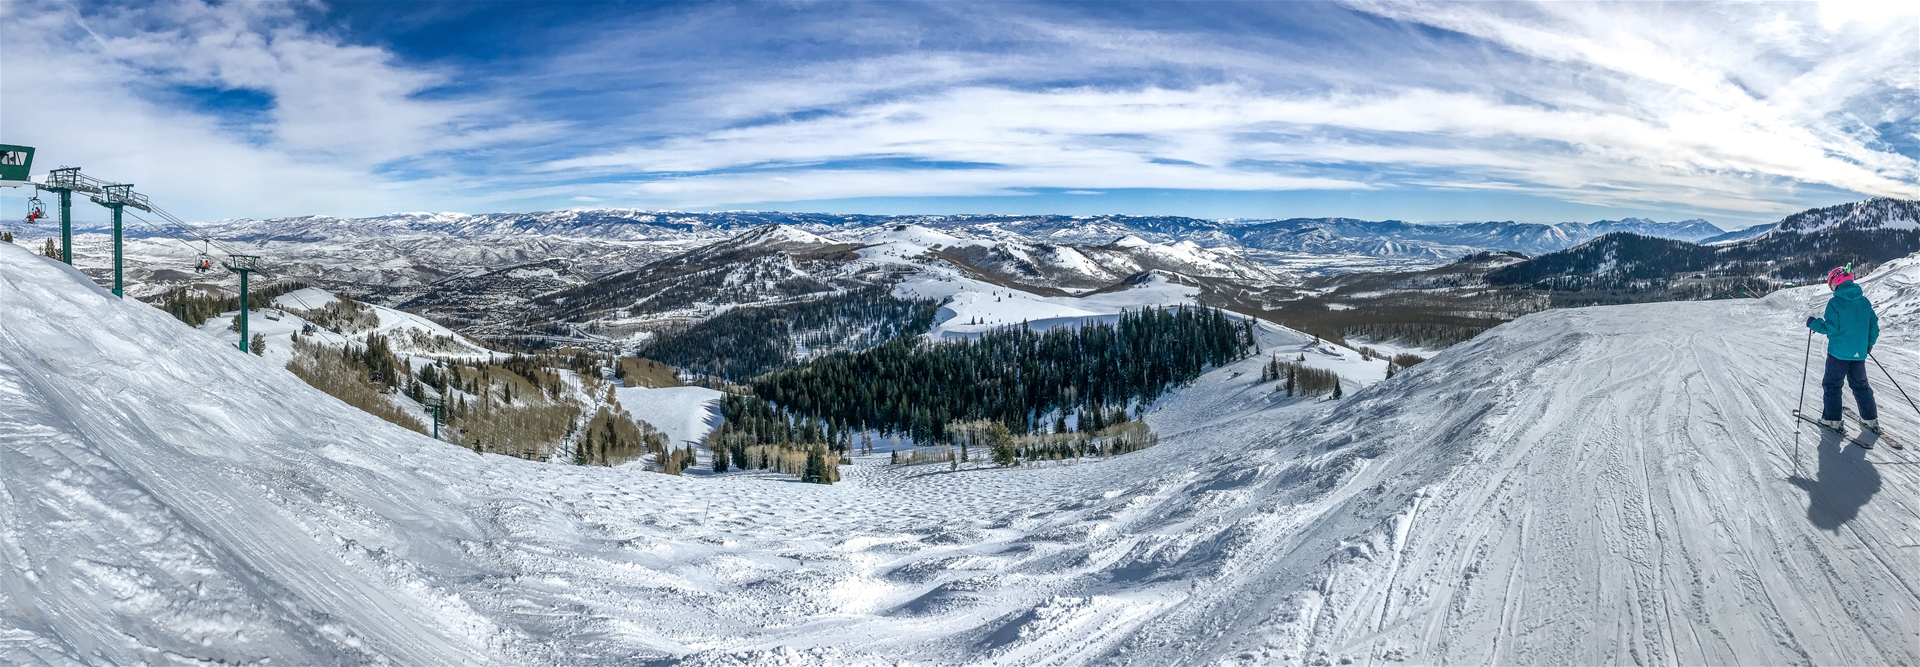 Panoramic view of Wasatch mountains at Deer Valley ski resort from near the top of Empire lift